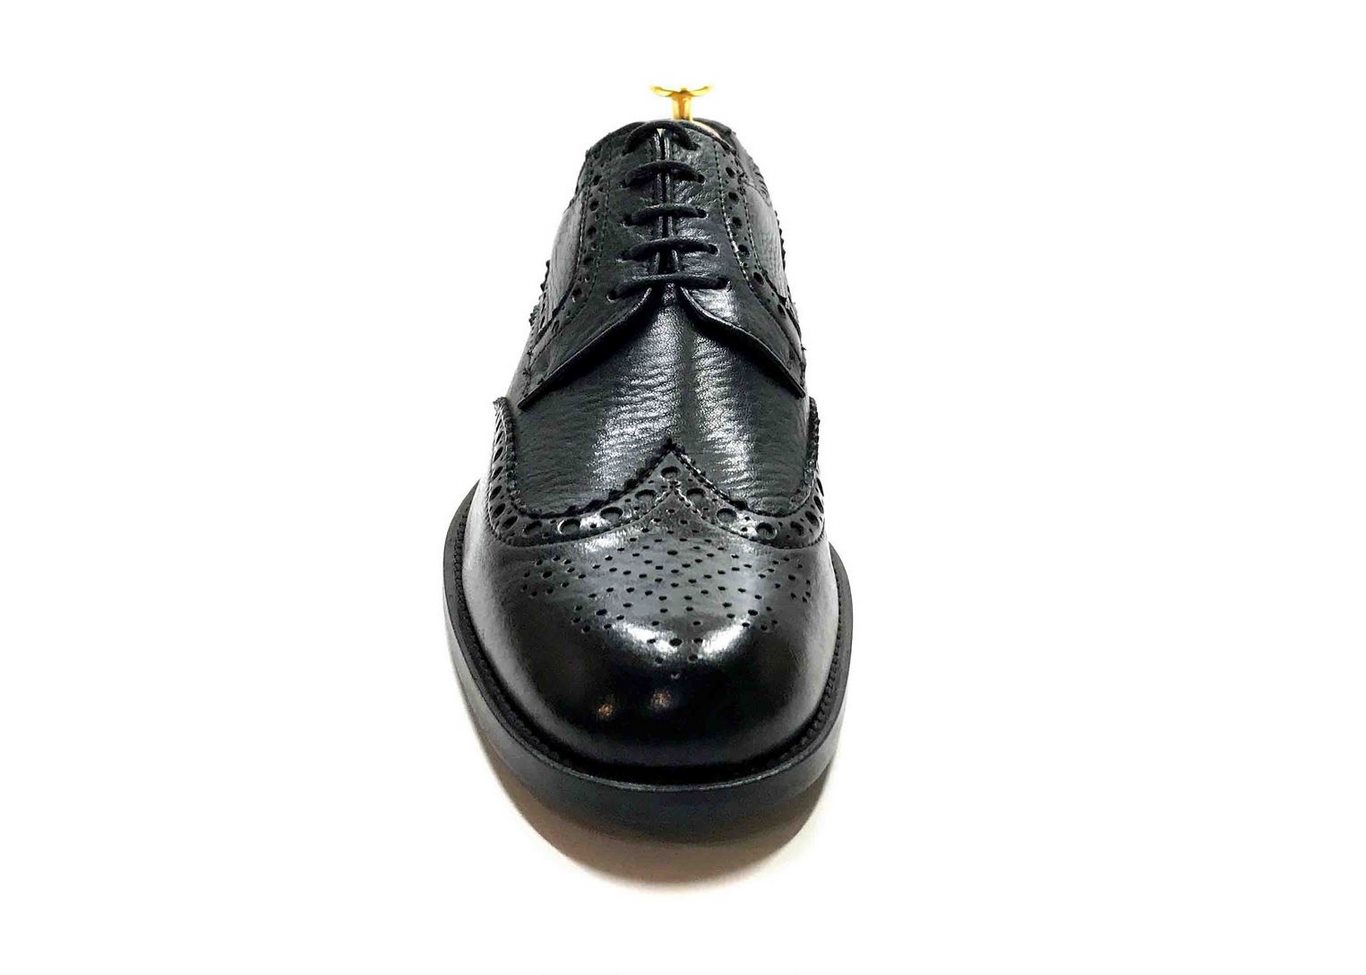 Comfort Laced with removable insoles in Black Canadian moose leather